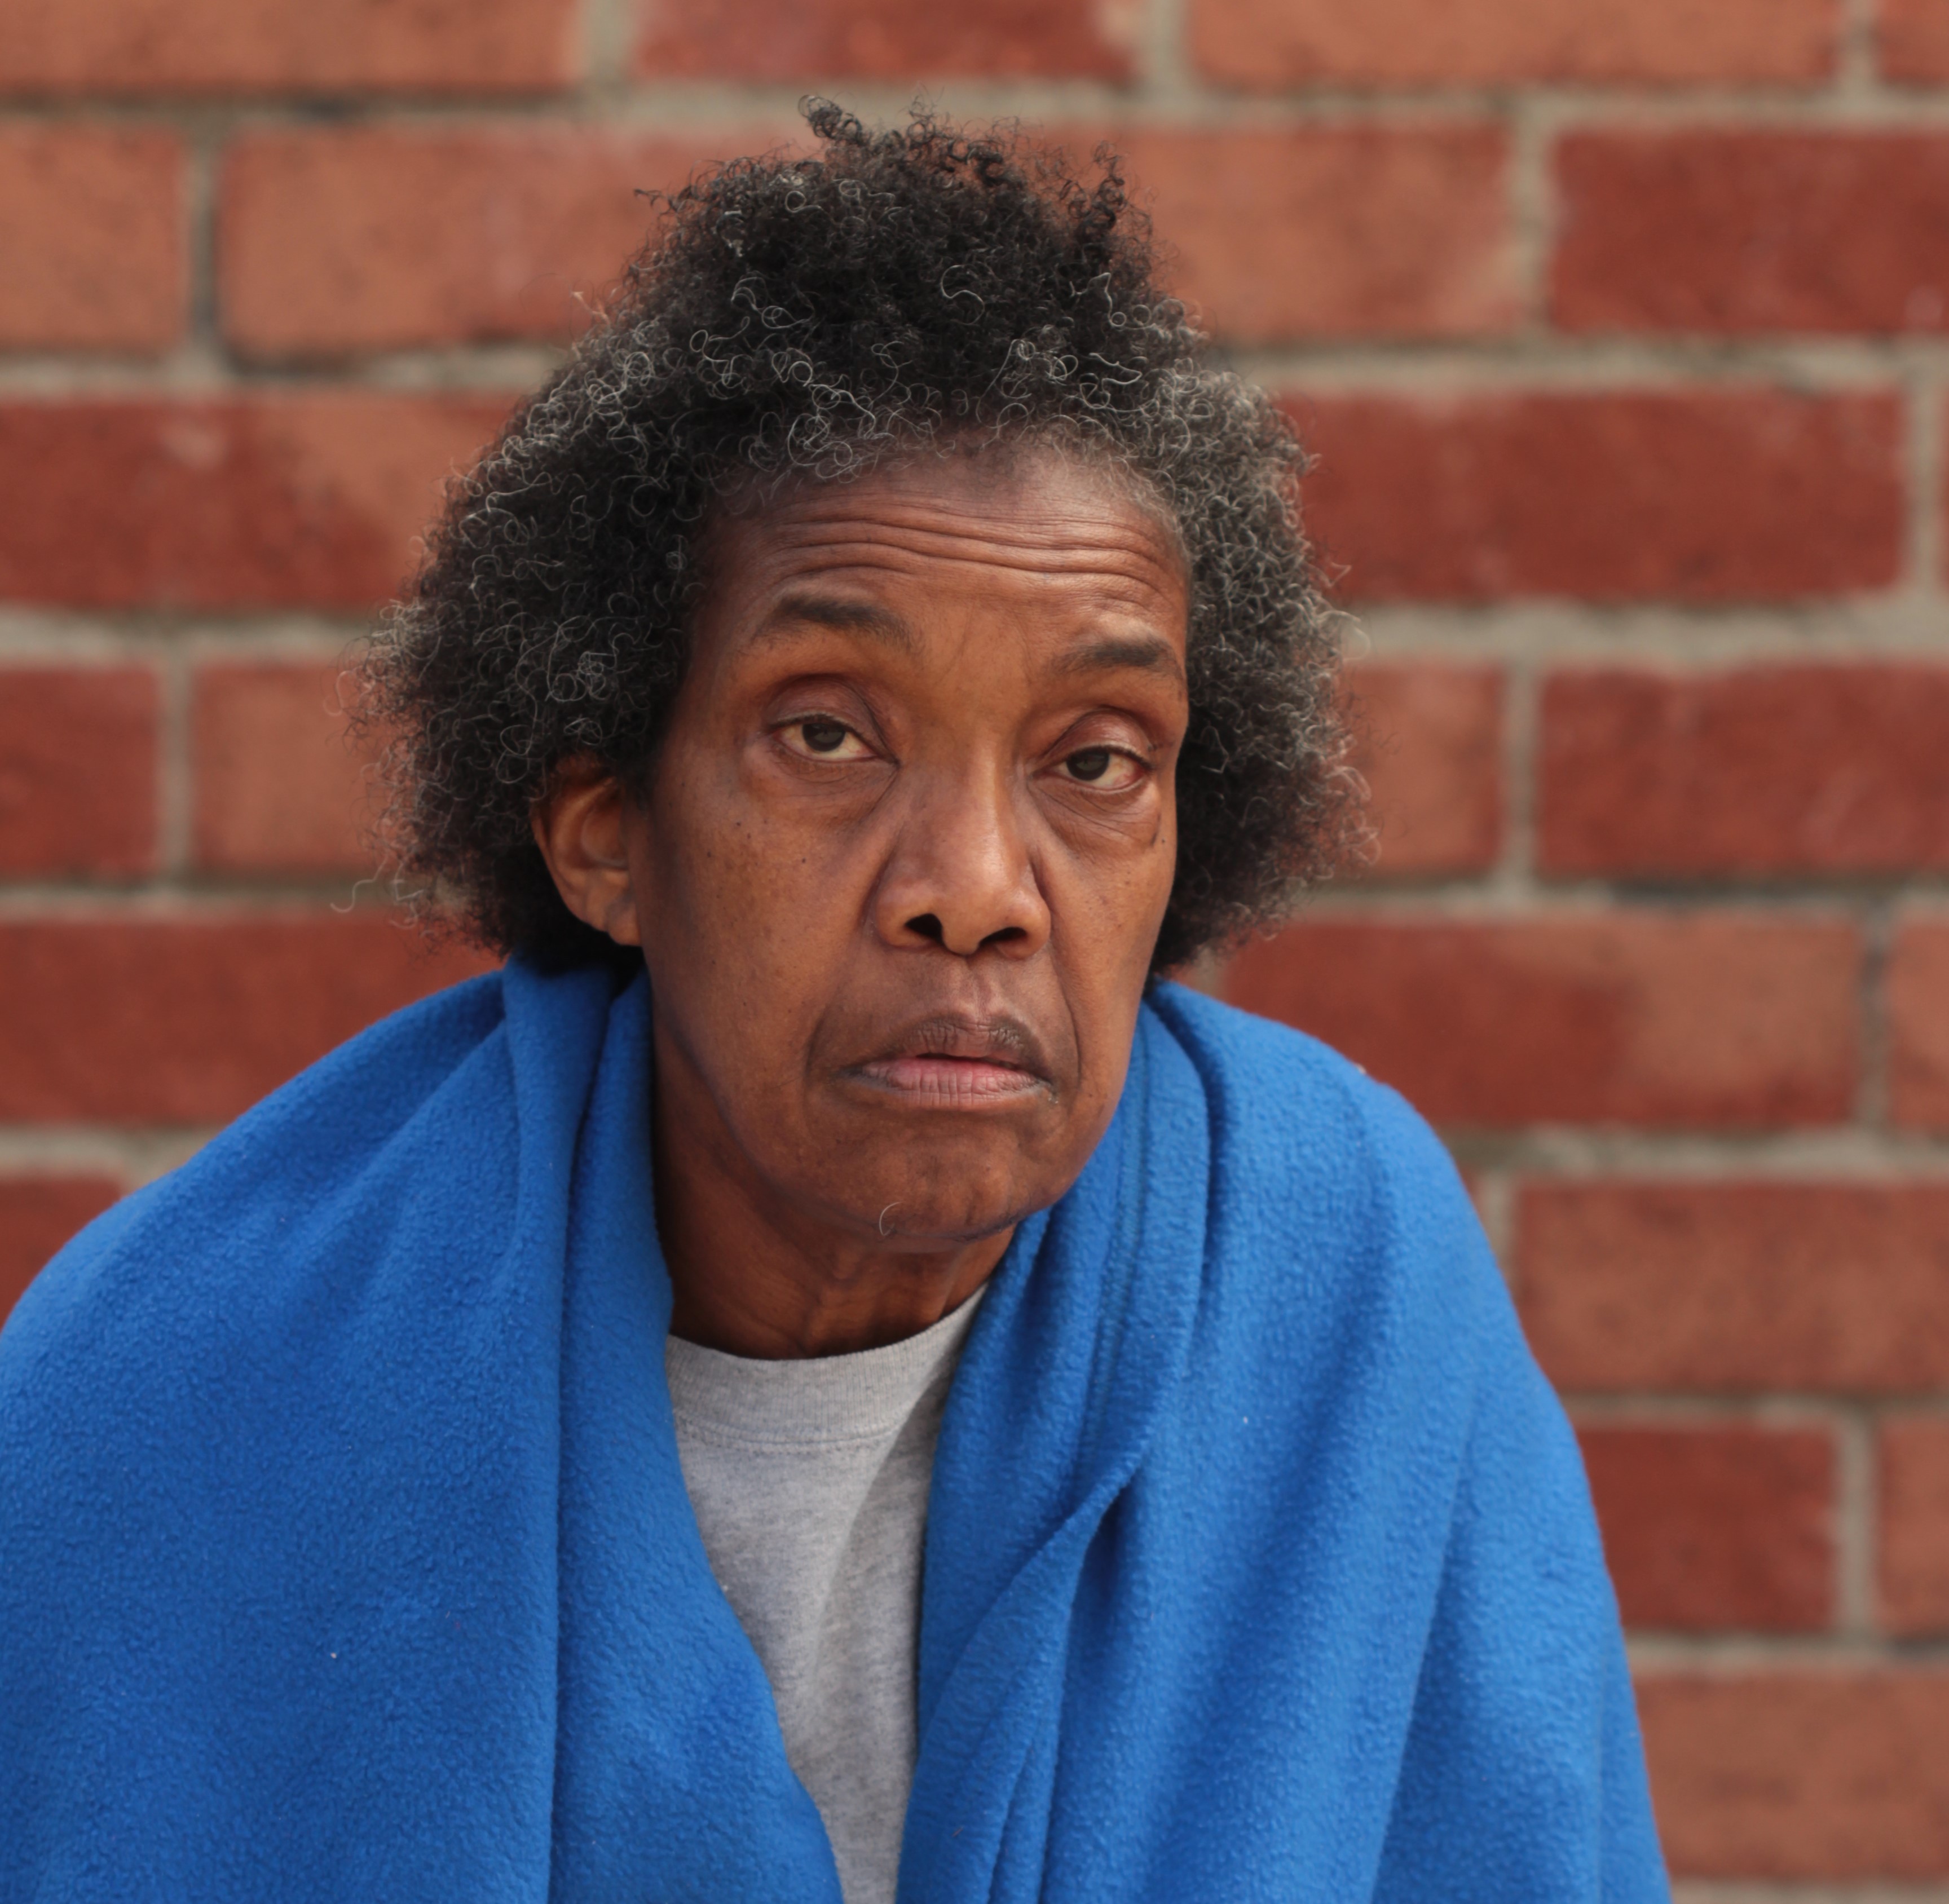 hOMELESS_WOMAN_TWO_cropped_sample.JPG